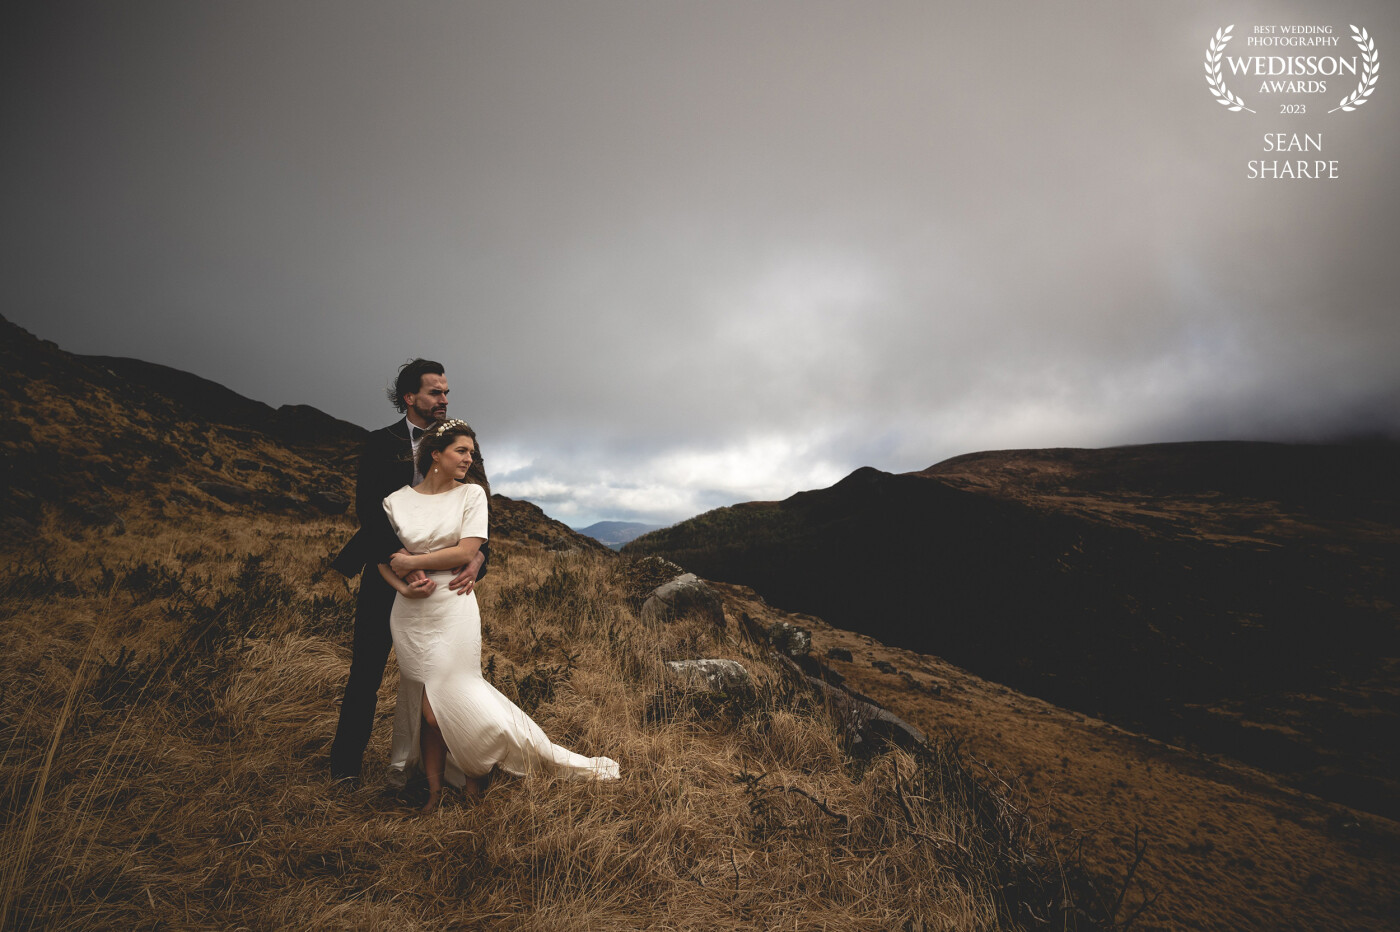 Anothet shoot in the mountains of Kerry. I absolutely love the atmosphere of this image. What a backdrop. What a couple.